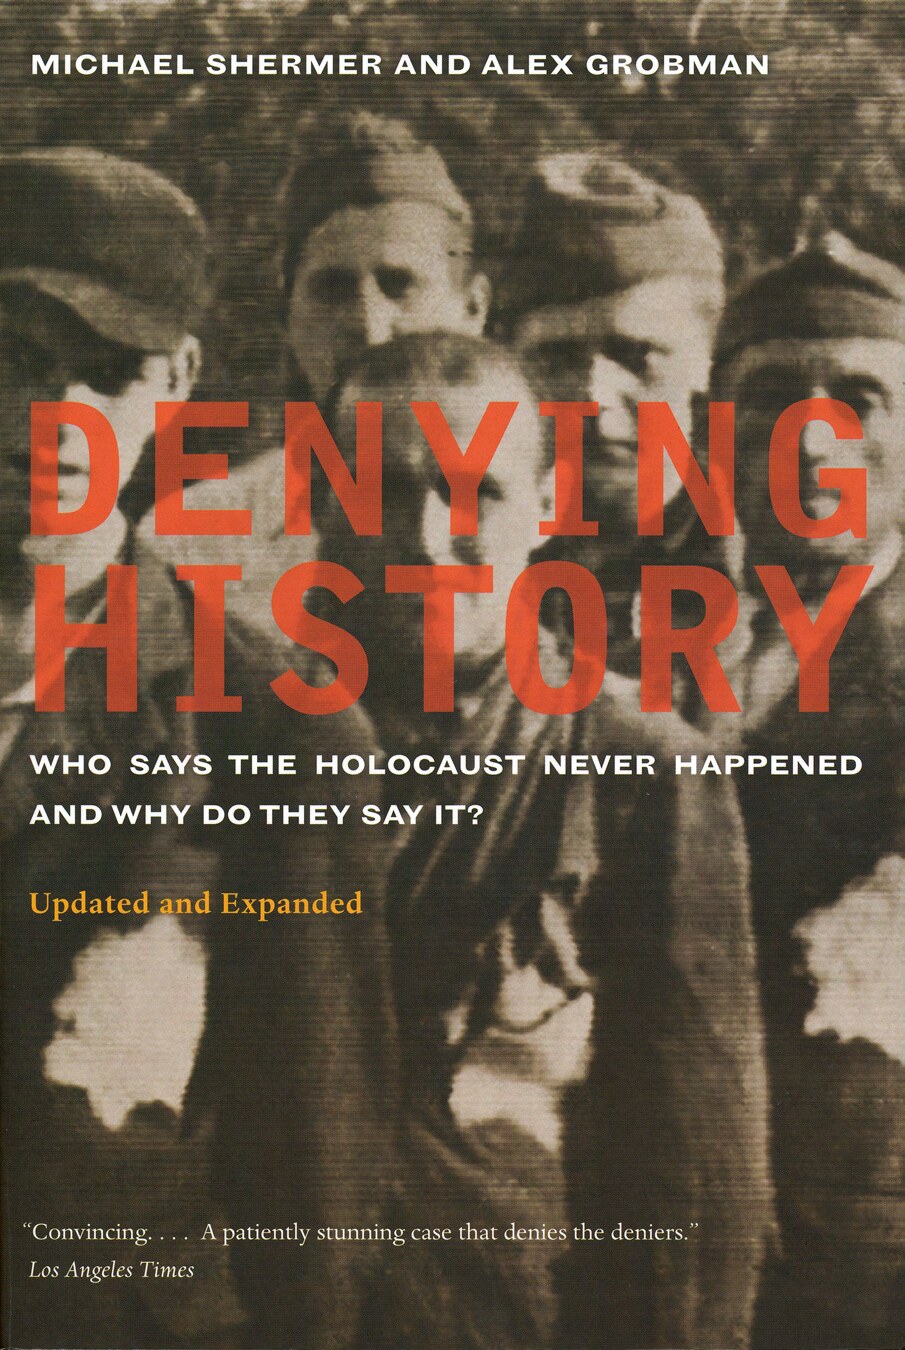 Shermer & Grobman; Denying History - Who Says The Holocaust Never Happened And Why Do They Say It